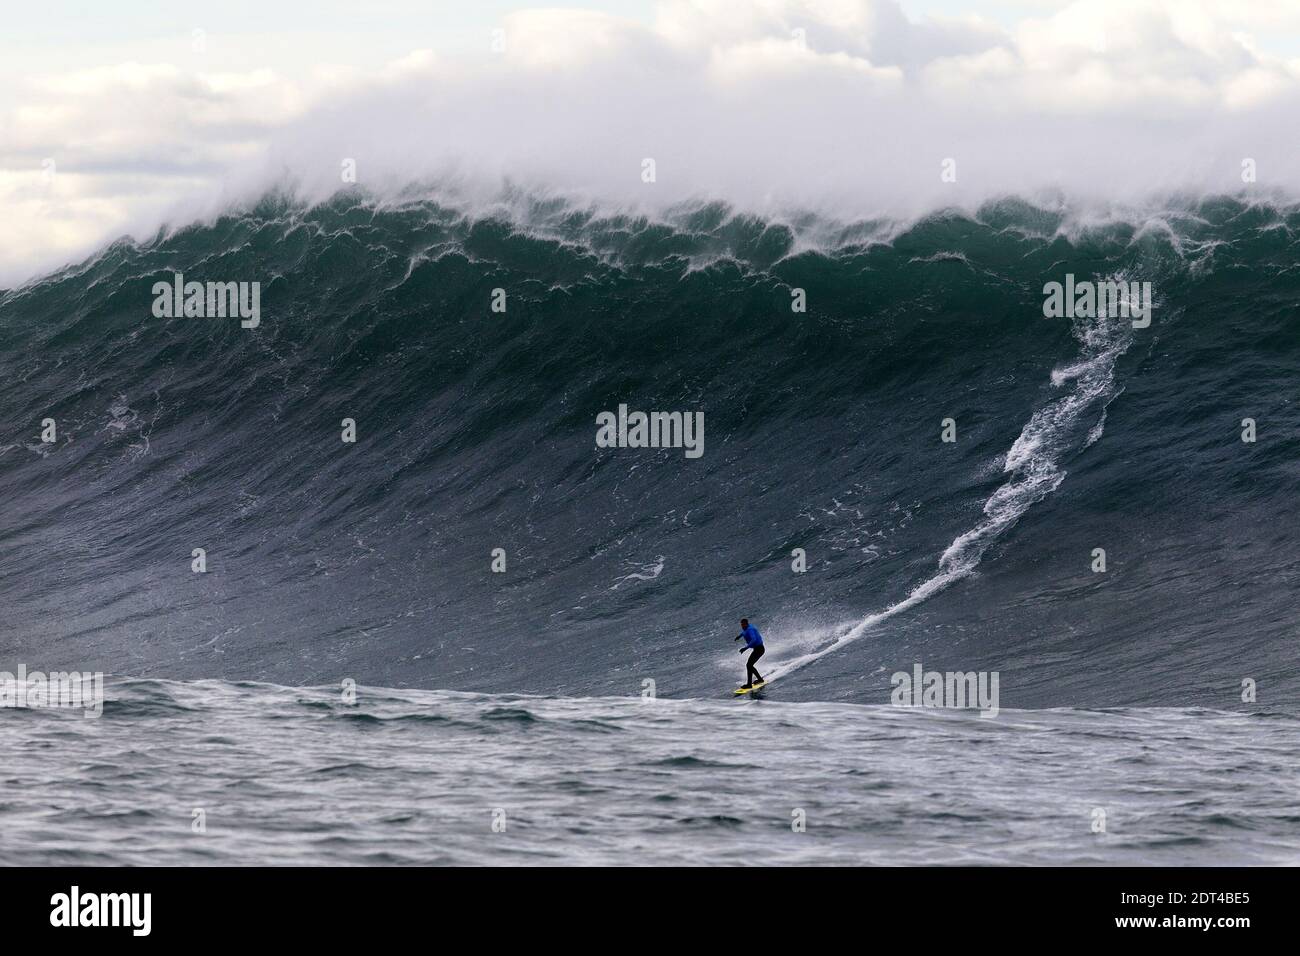 A man surfs the Belharra giant waves some two kilometers off the coast of the French basque country town of Urrugne near Saint-Jean-De-Luz, France on January 7, 2014. Thanks to certain climatic conditions in autumn and winter, a strong swell hits the Belharra Perdun underwater spur enabling a 10 to 15 metre wave to form. This wave is only surfed by experts who are towed out by a water scooter. Photo by Masurel/Photomobile/ABACAPRESS.COM Stock Photo